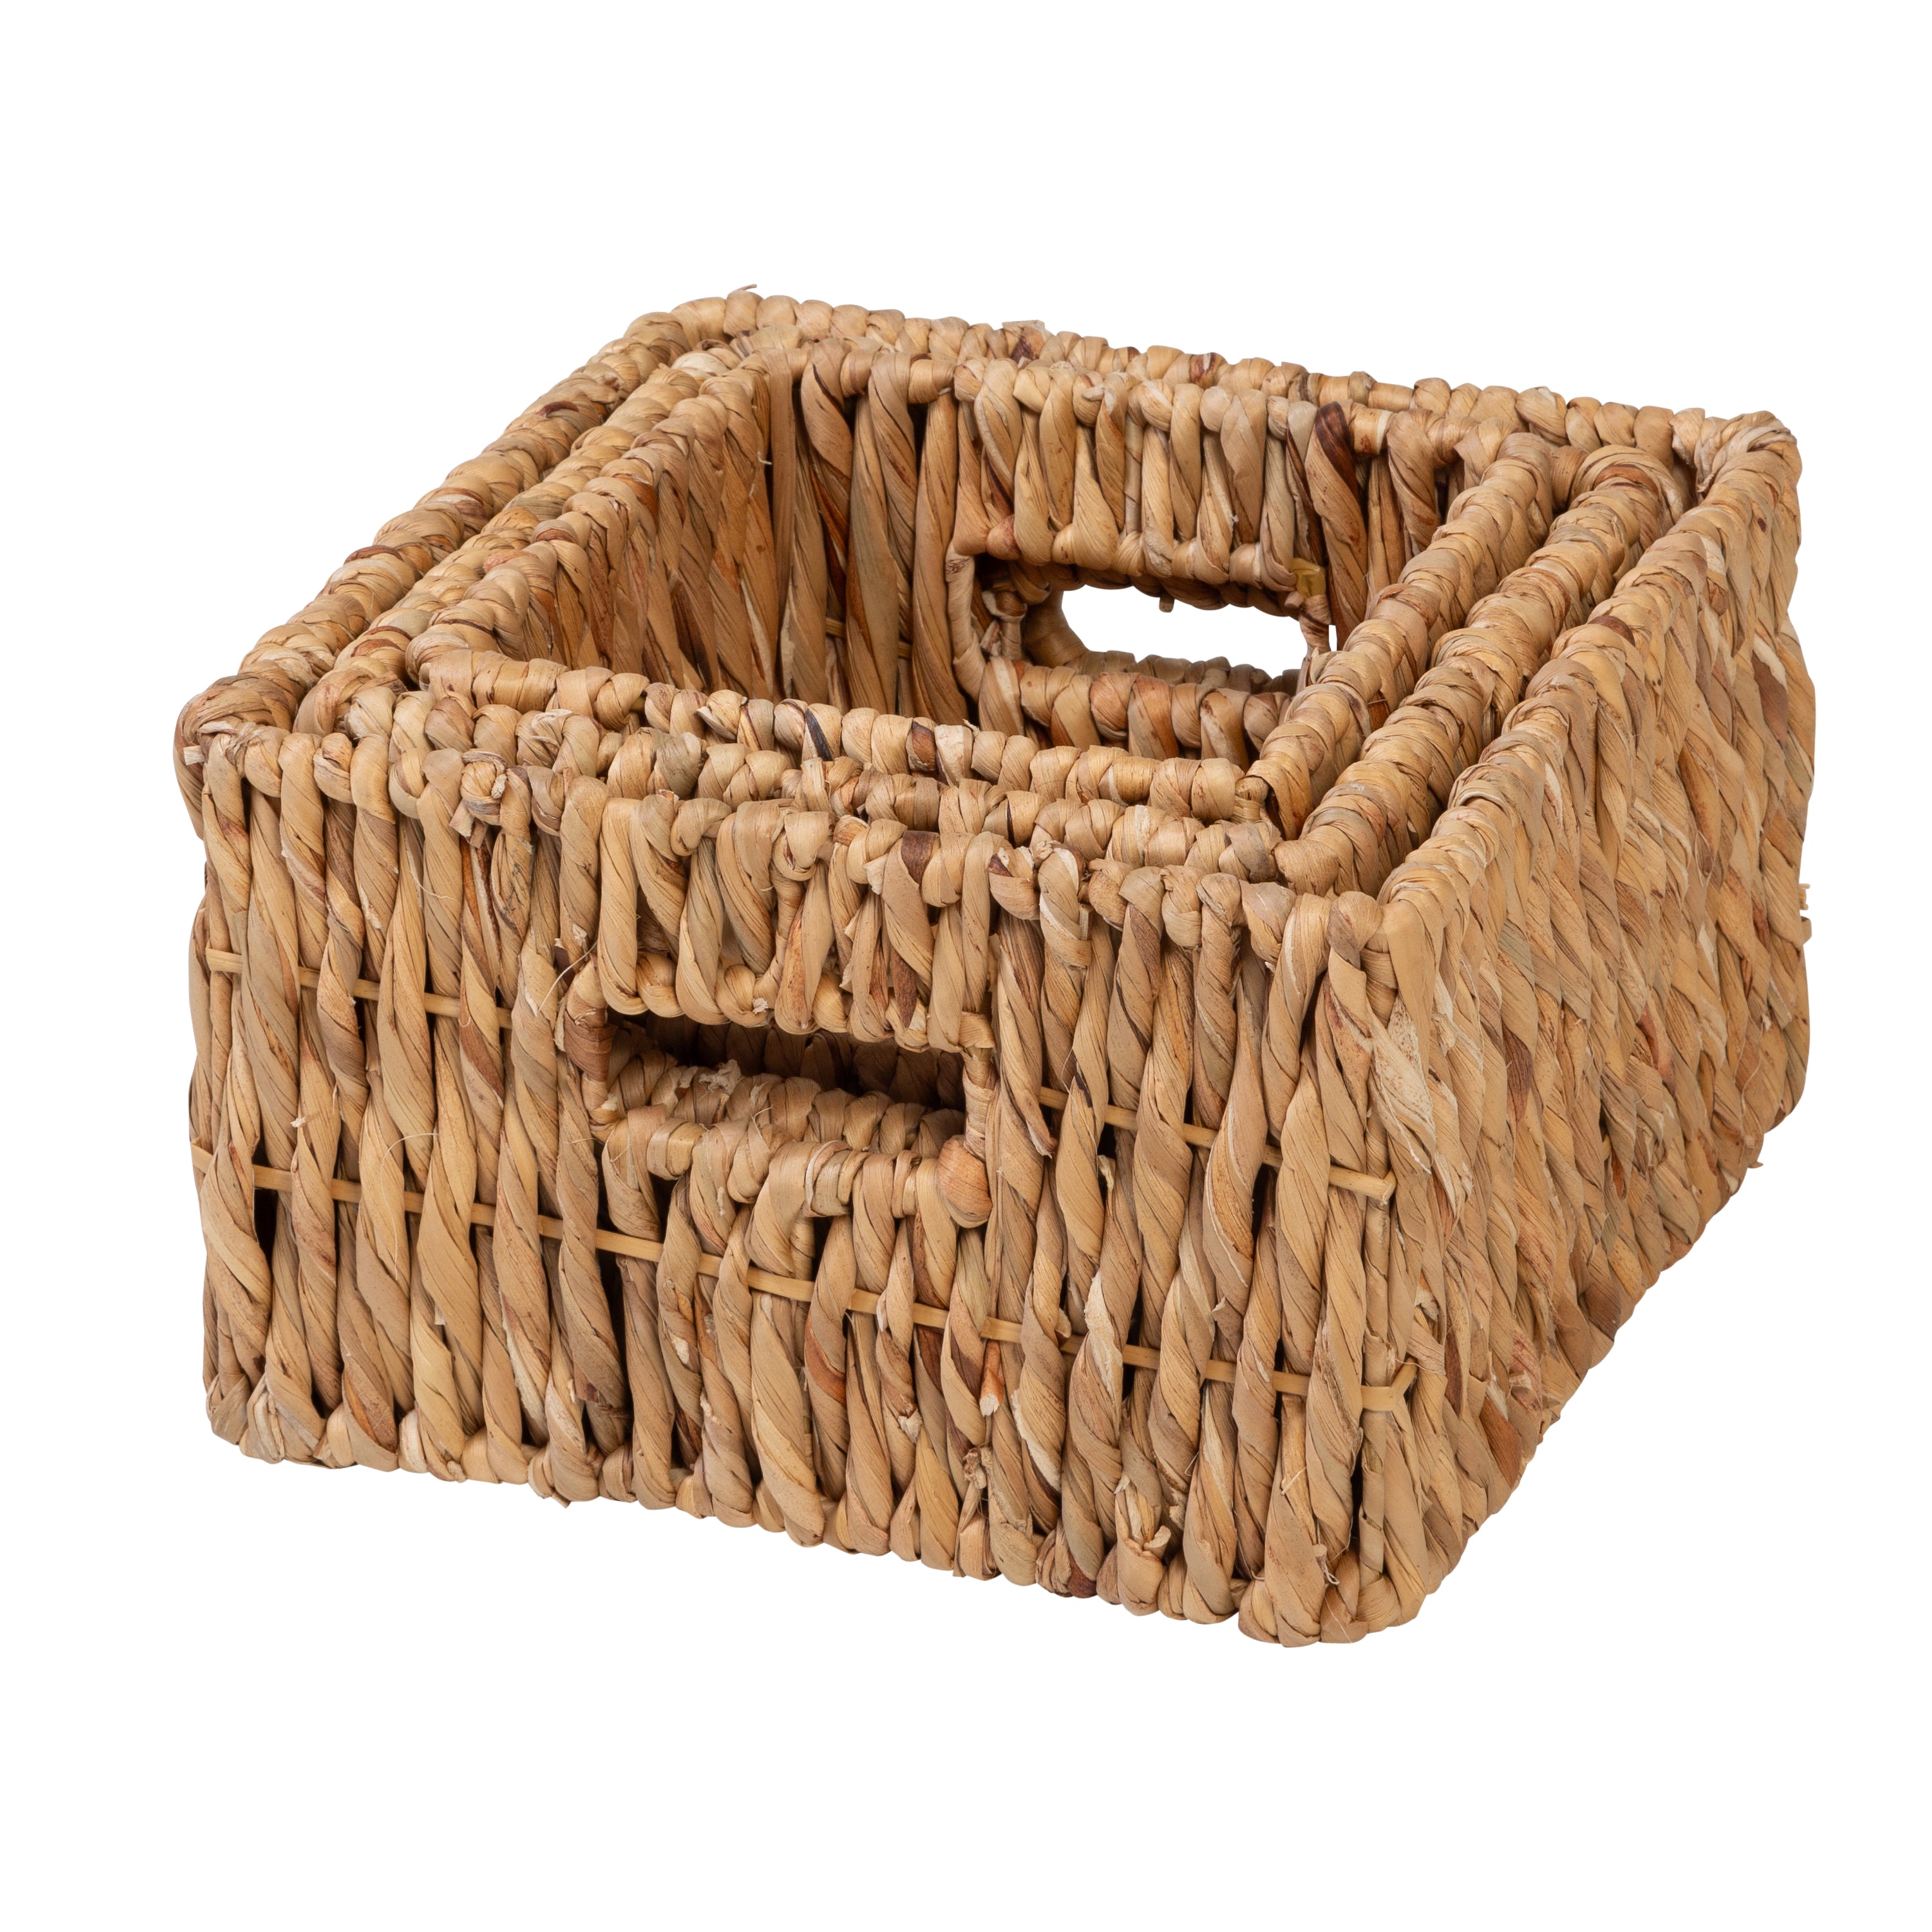 Honey-Can-Do Set of 3 Square Nested Baskets, NA tural ,Natural